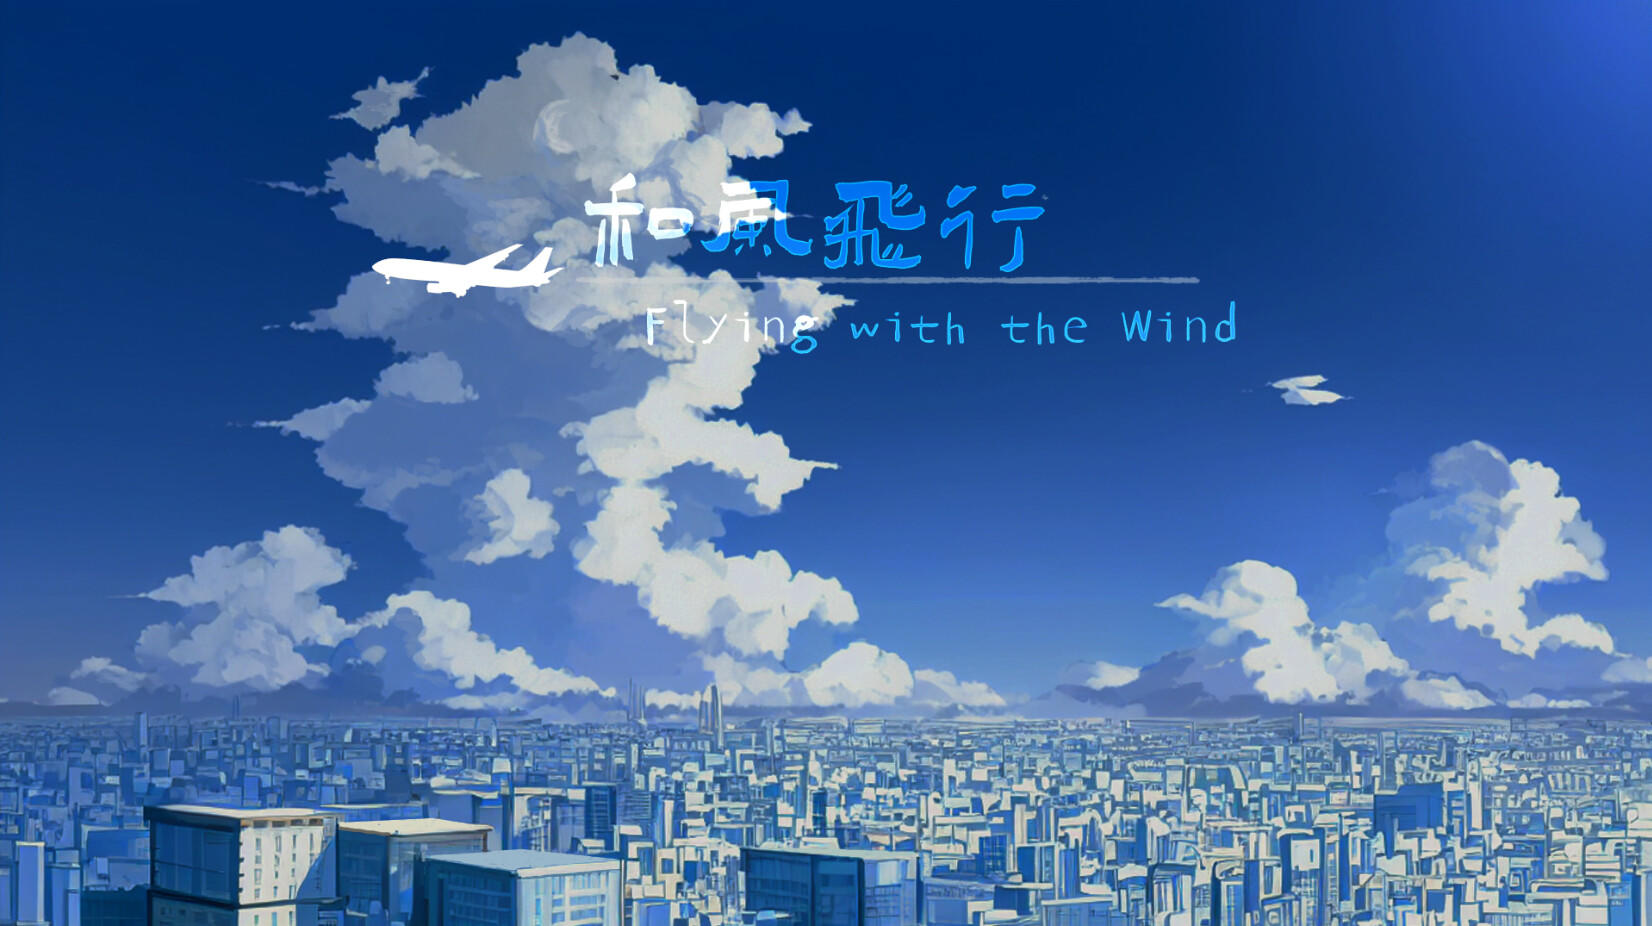 Screenshot of 和风飞行 Flying with the wind